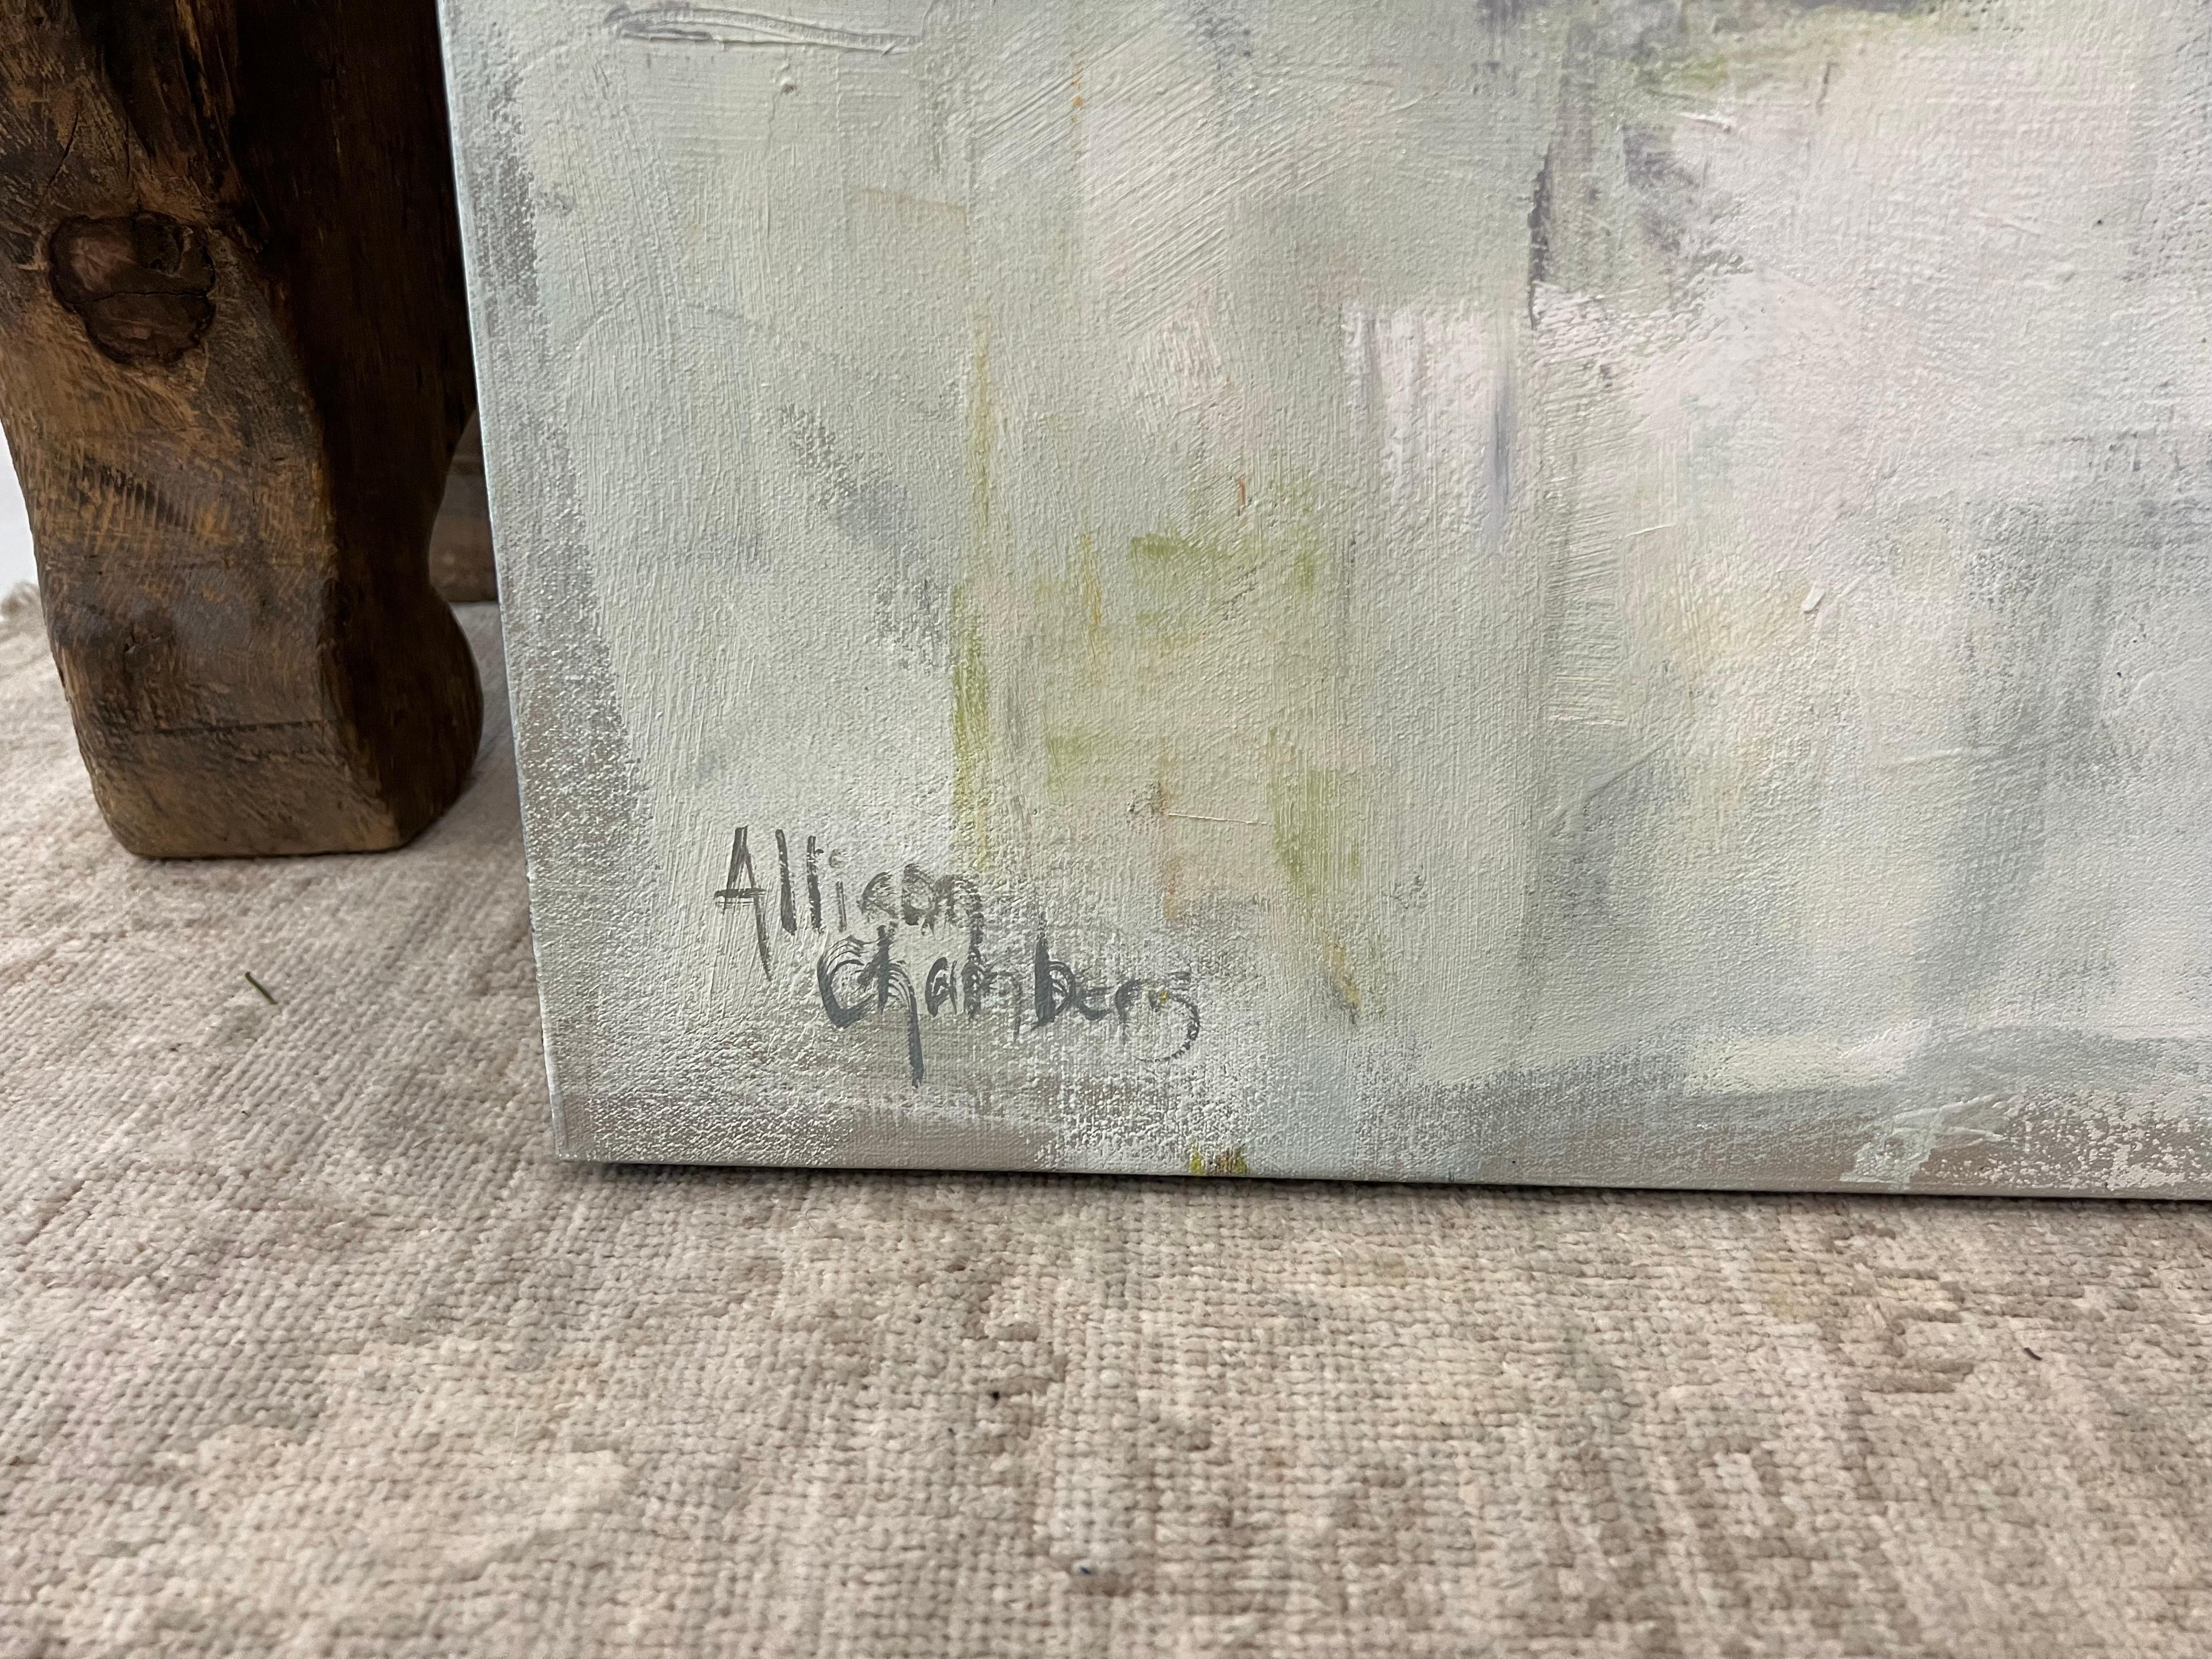 Allison’s softly rendered and beautifully painted landscapes and waterscapes capture light, depth and the constantly shifting movement of water, flora and fauna.

Her impasto technique incorporates the texture that only comes from the liberal use of